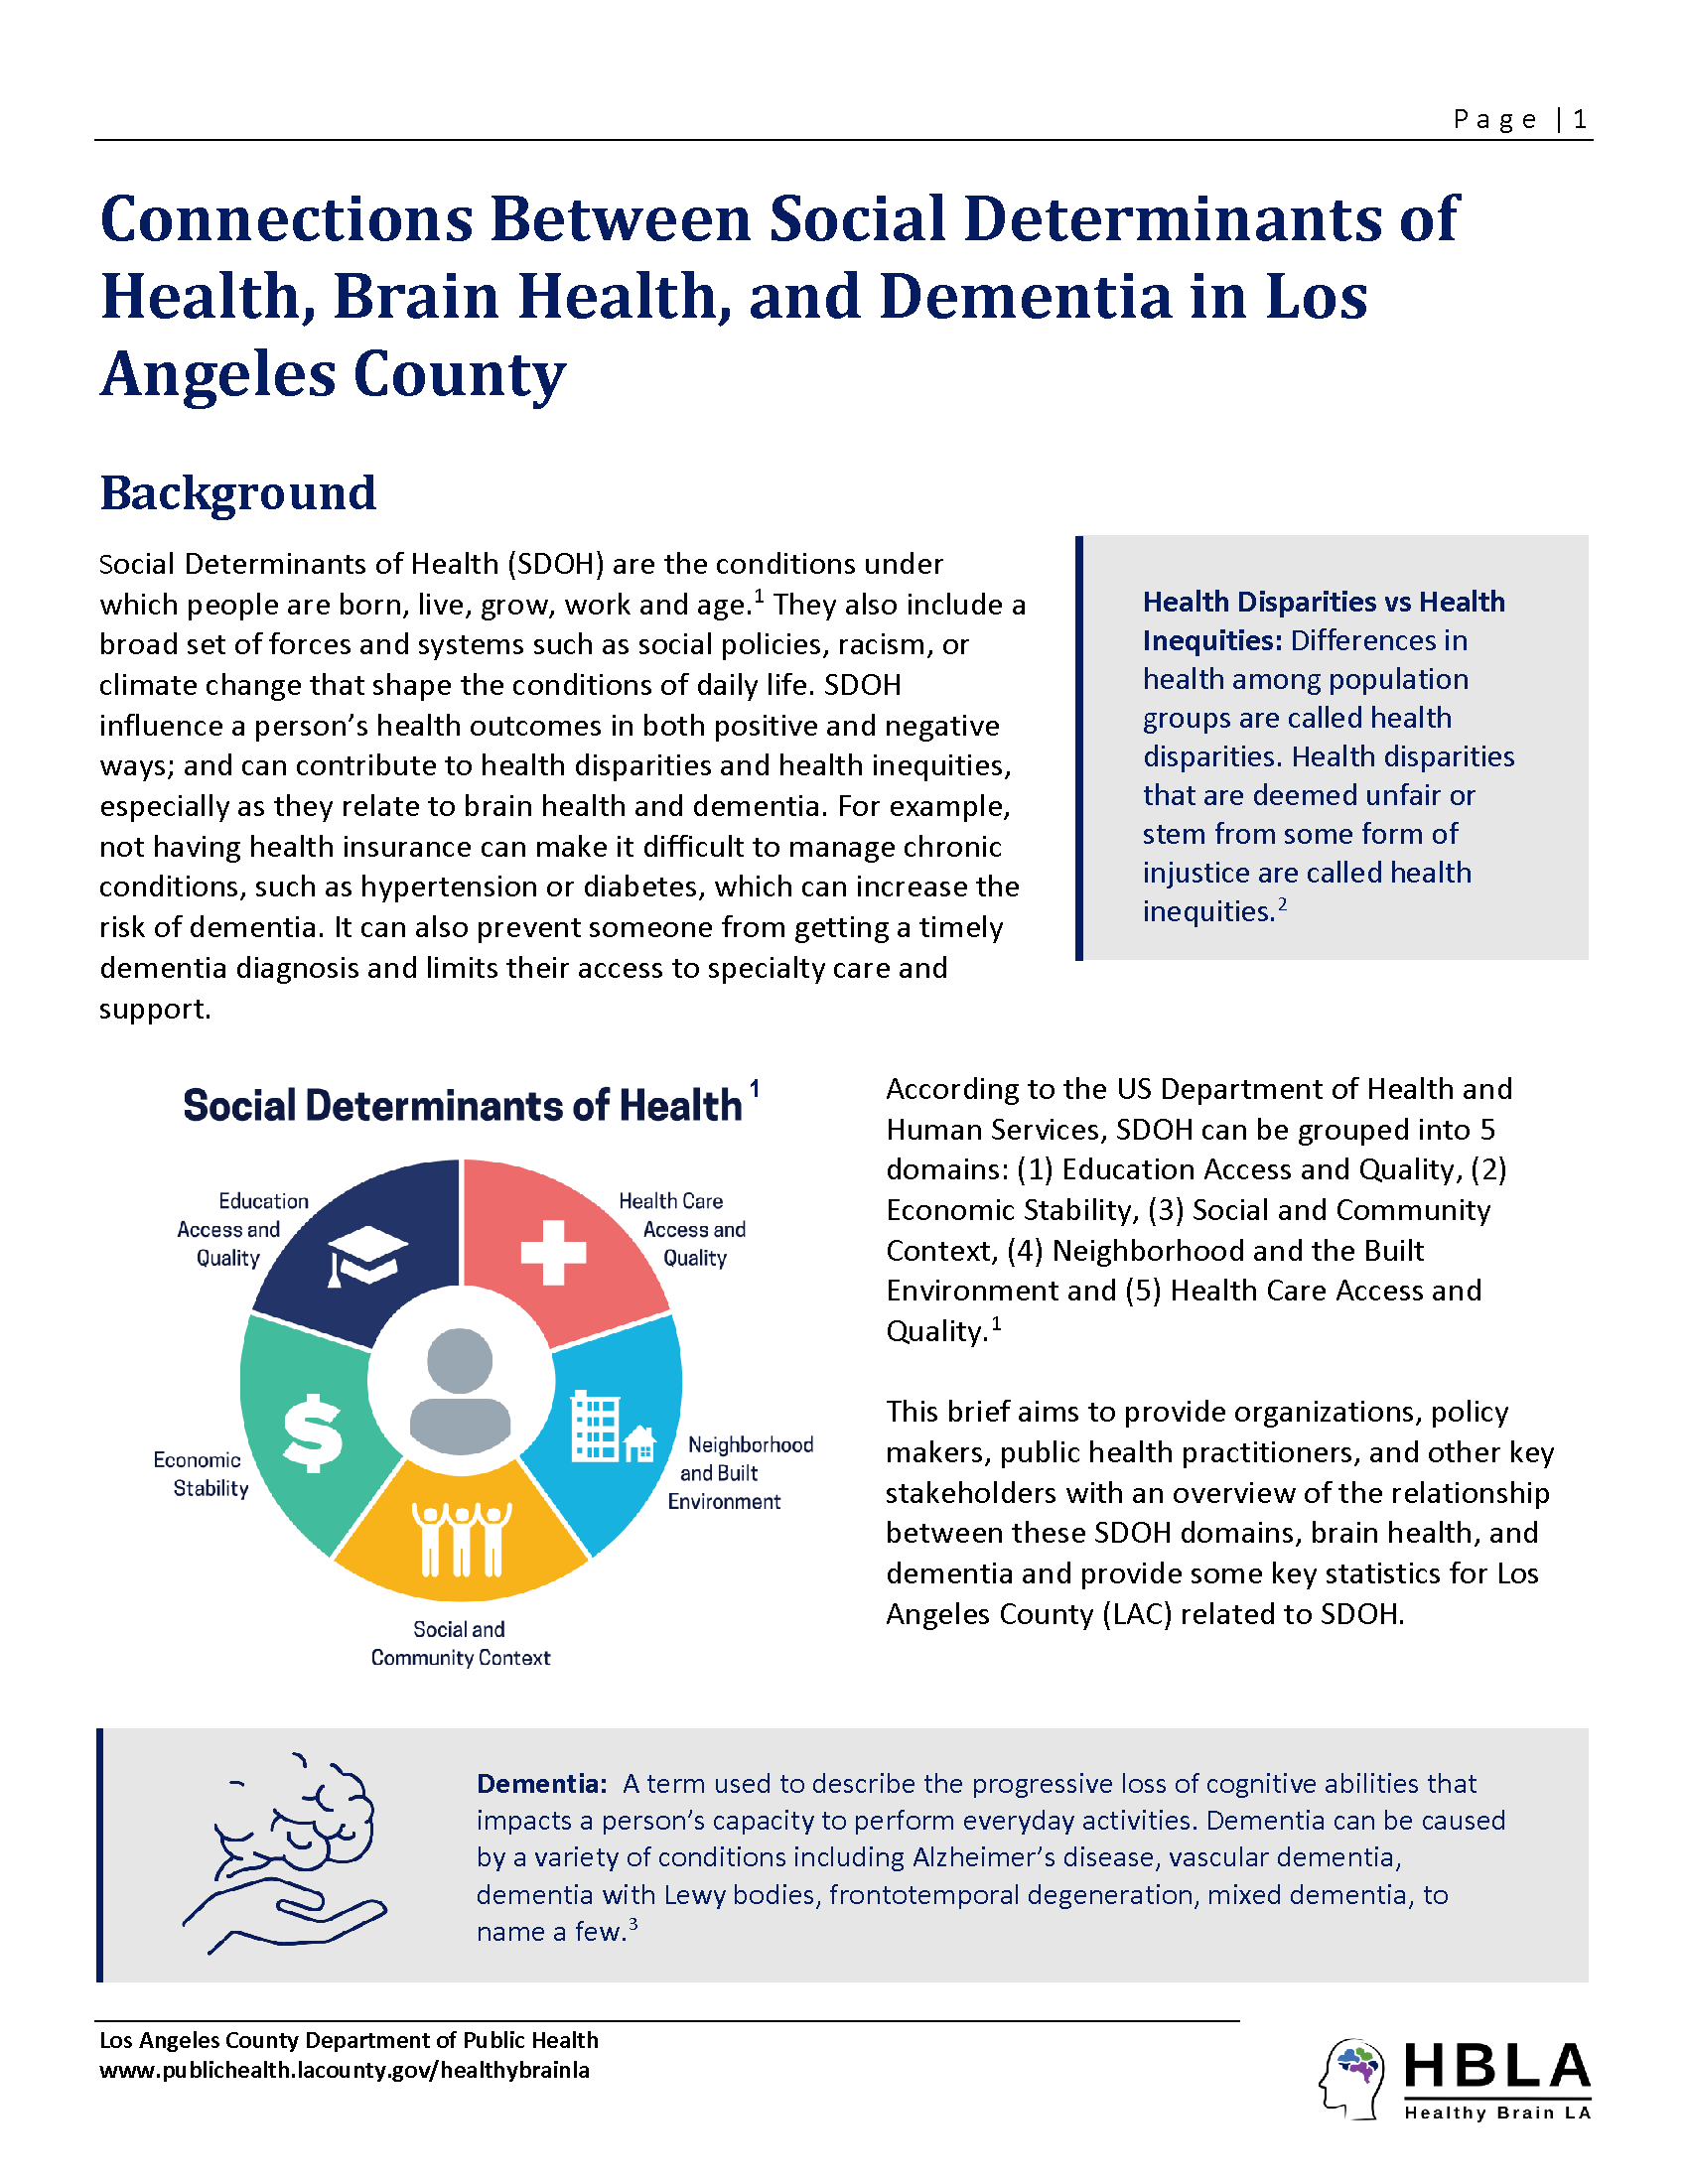 Cover image of the Connections Between Social Determinants of Health, Brain Health, and Dementia in Los Angeles County